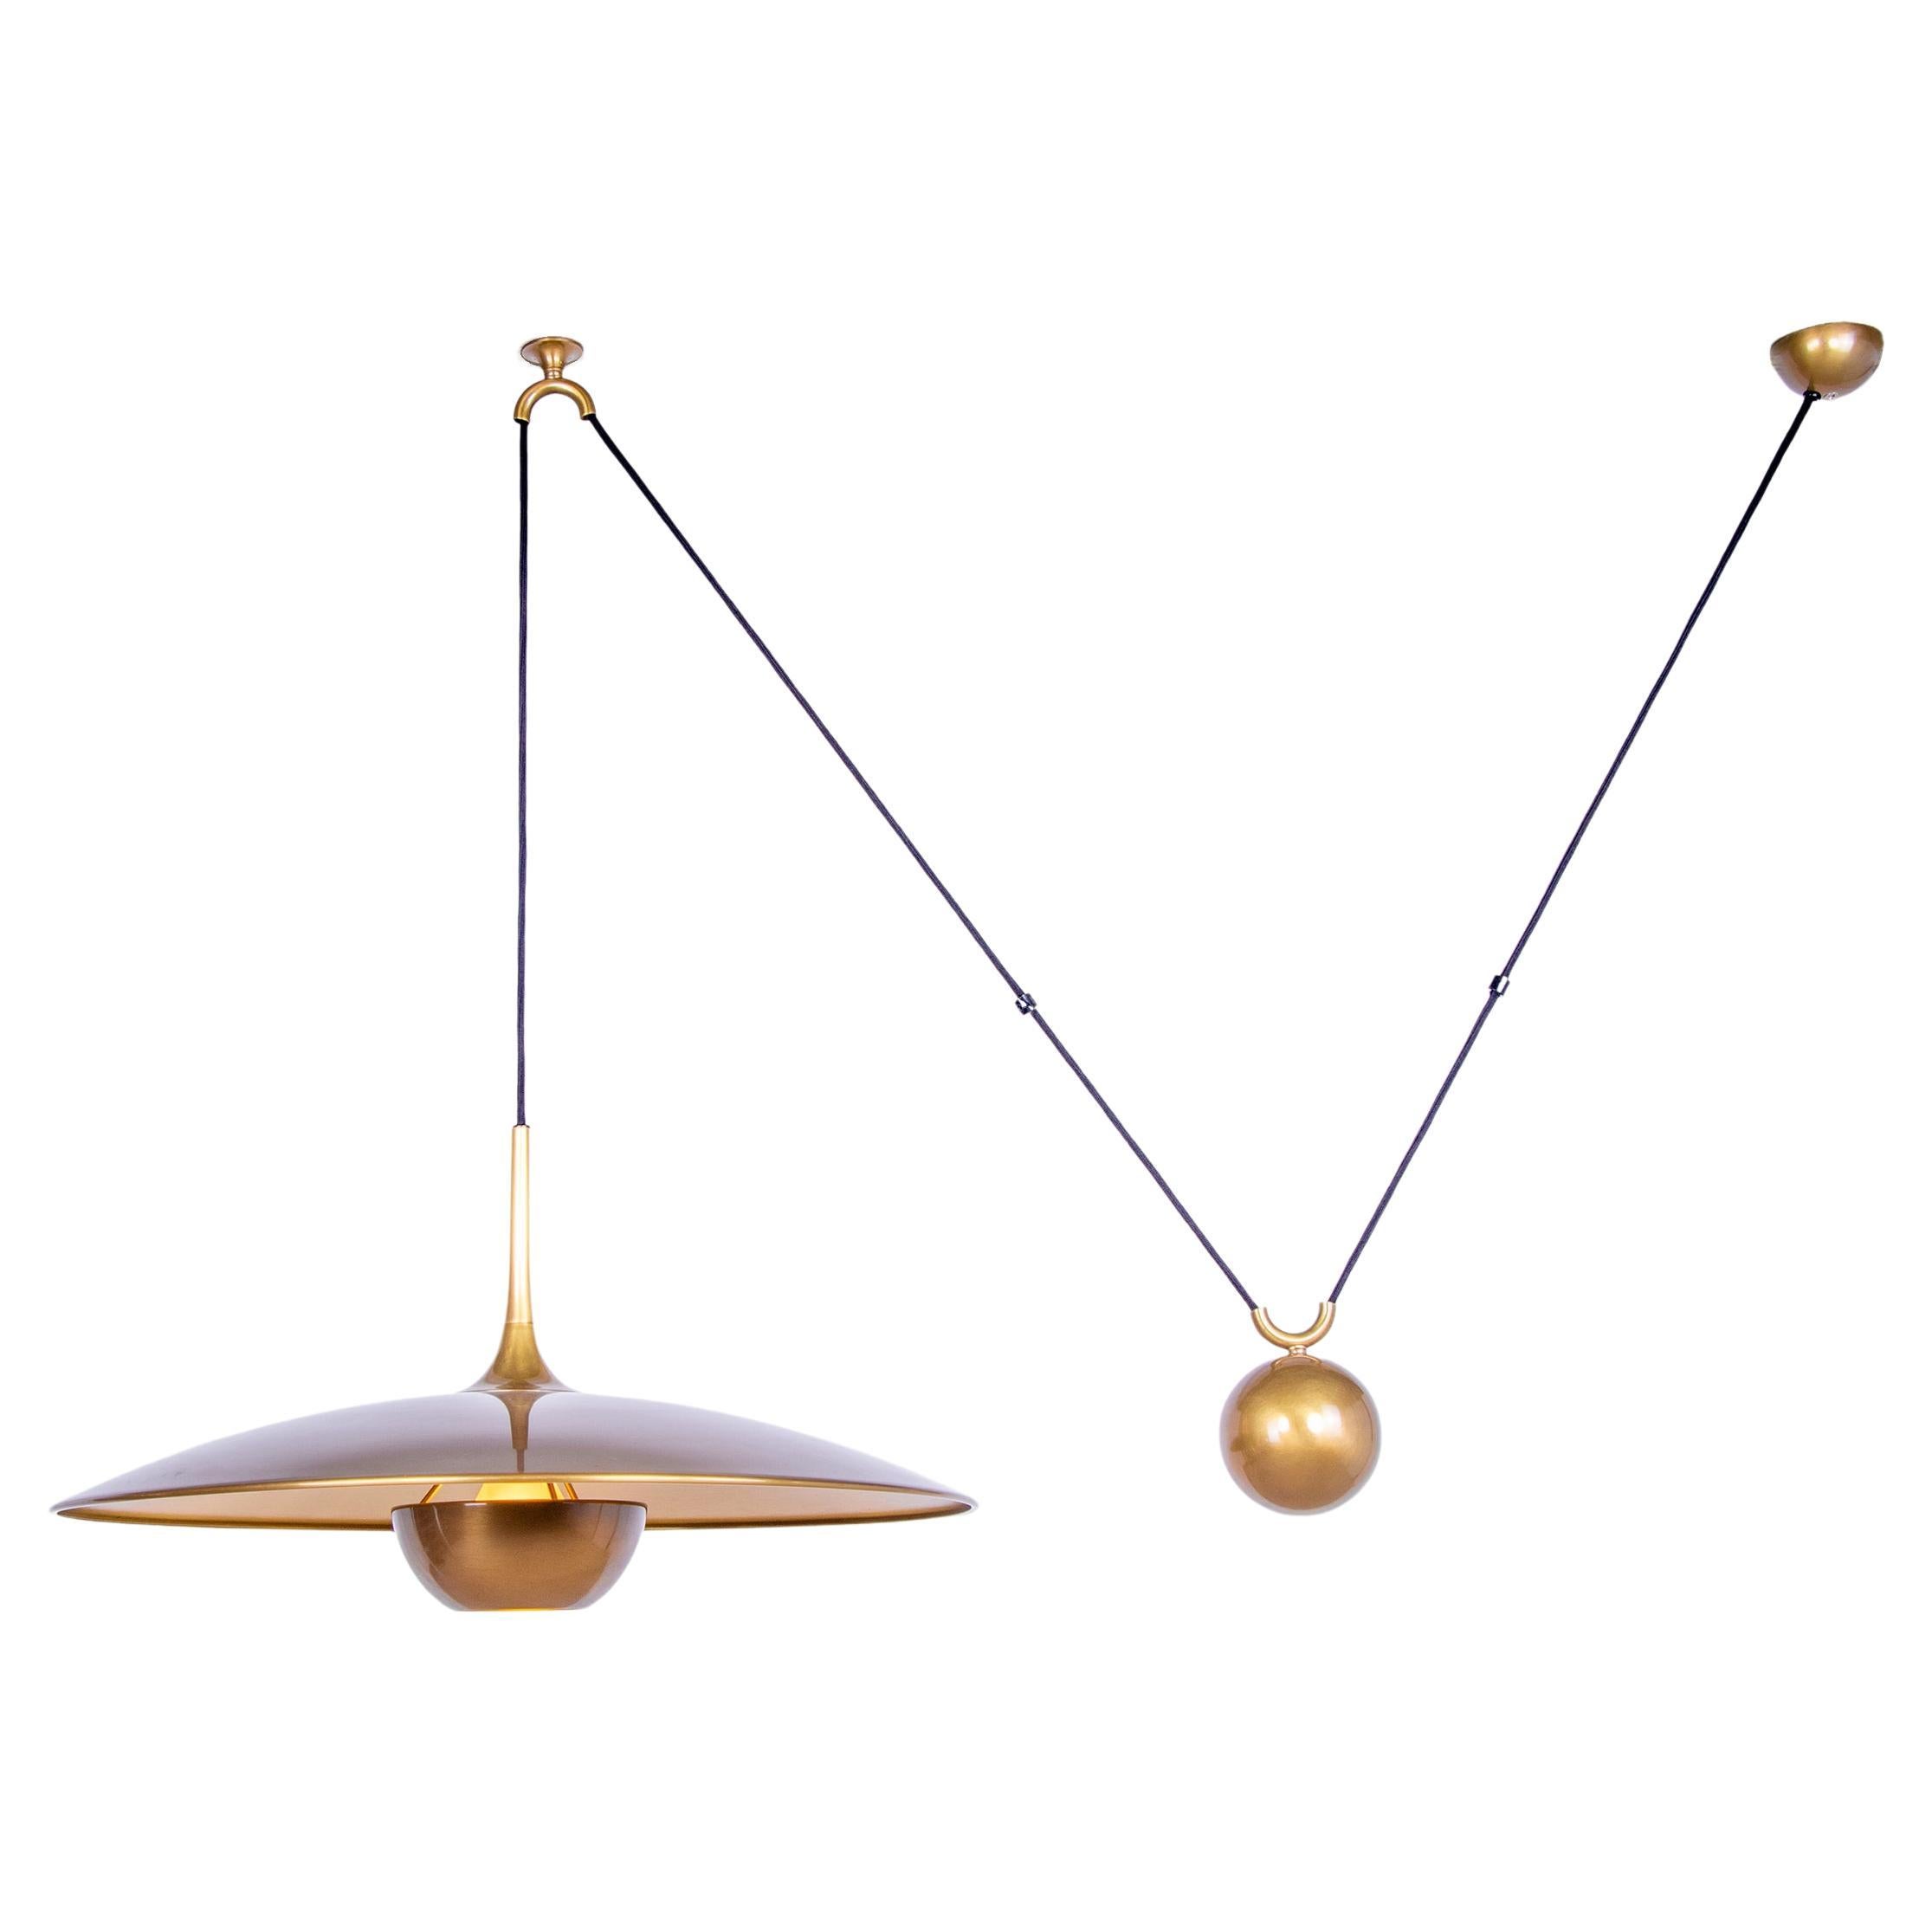 Adjustable Brass Pendant Lamp Onos 55 by Florian Schulz, Germany, 1970s For Sale